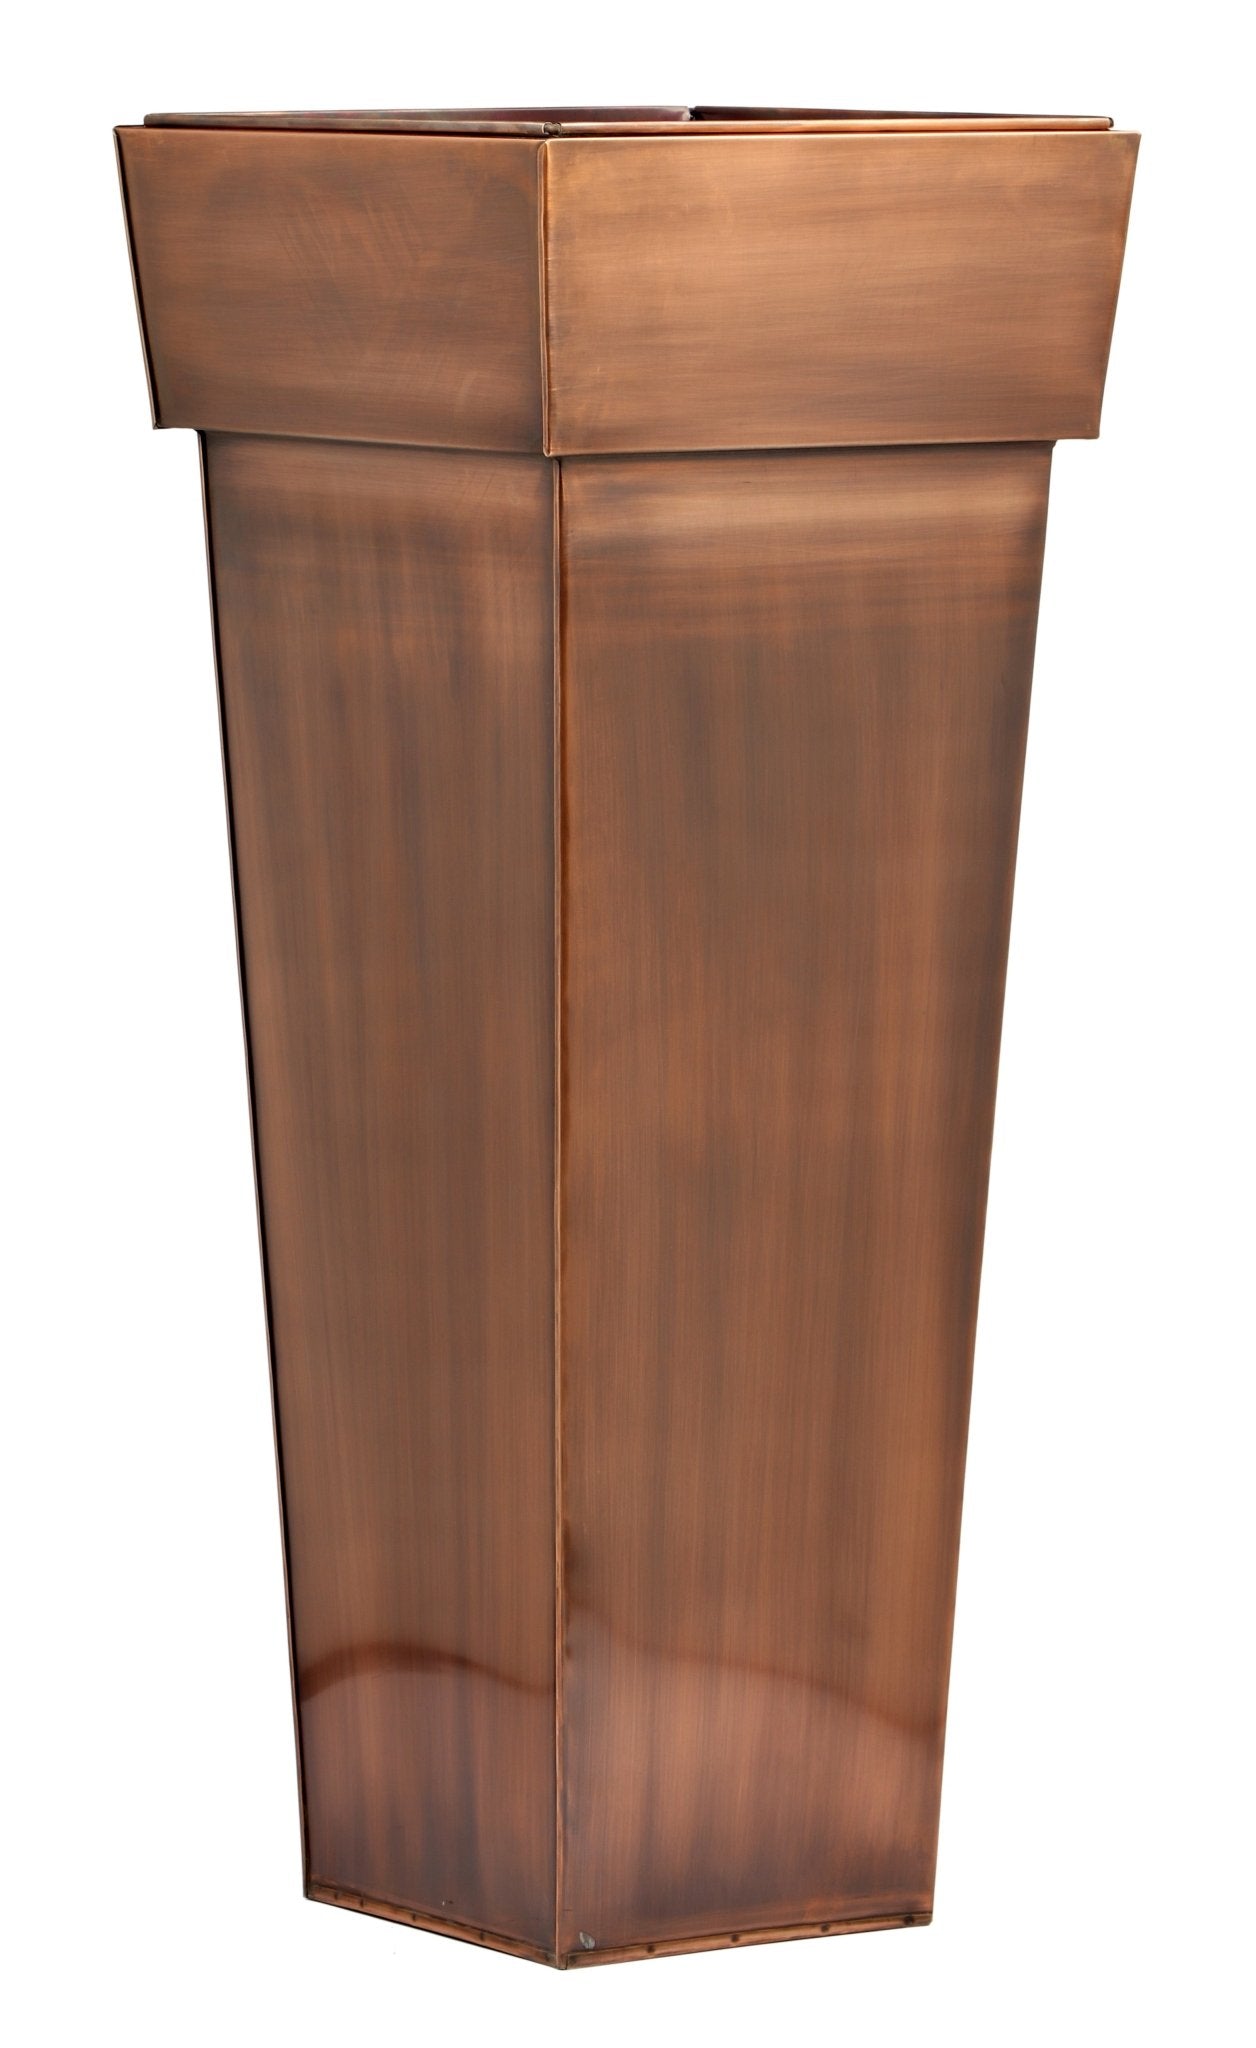 H Potter Tall Square Planter – Stainless Steel w/Antique Copper Finish 36.5